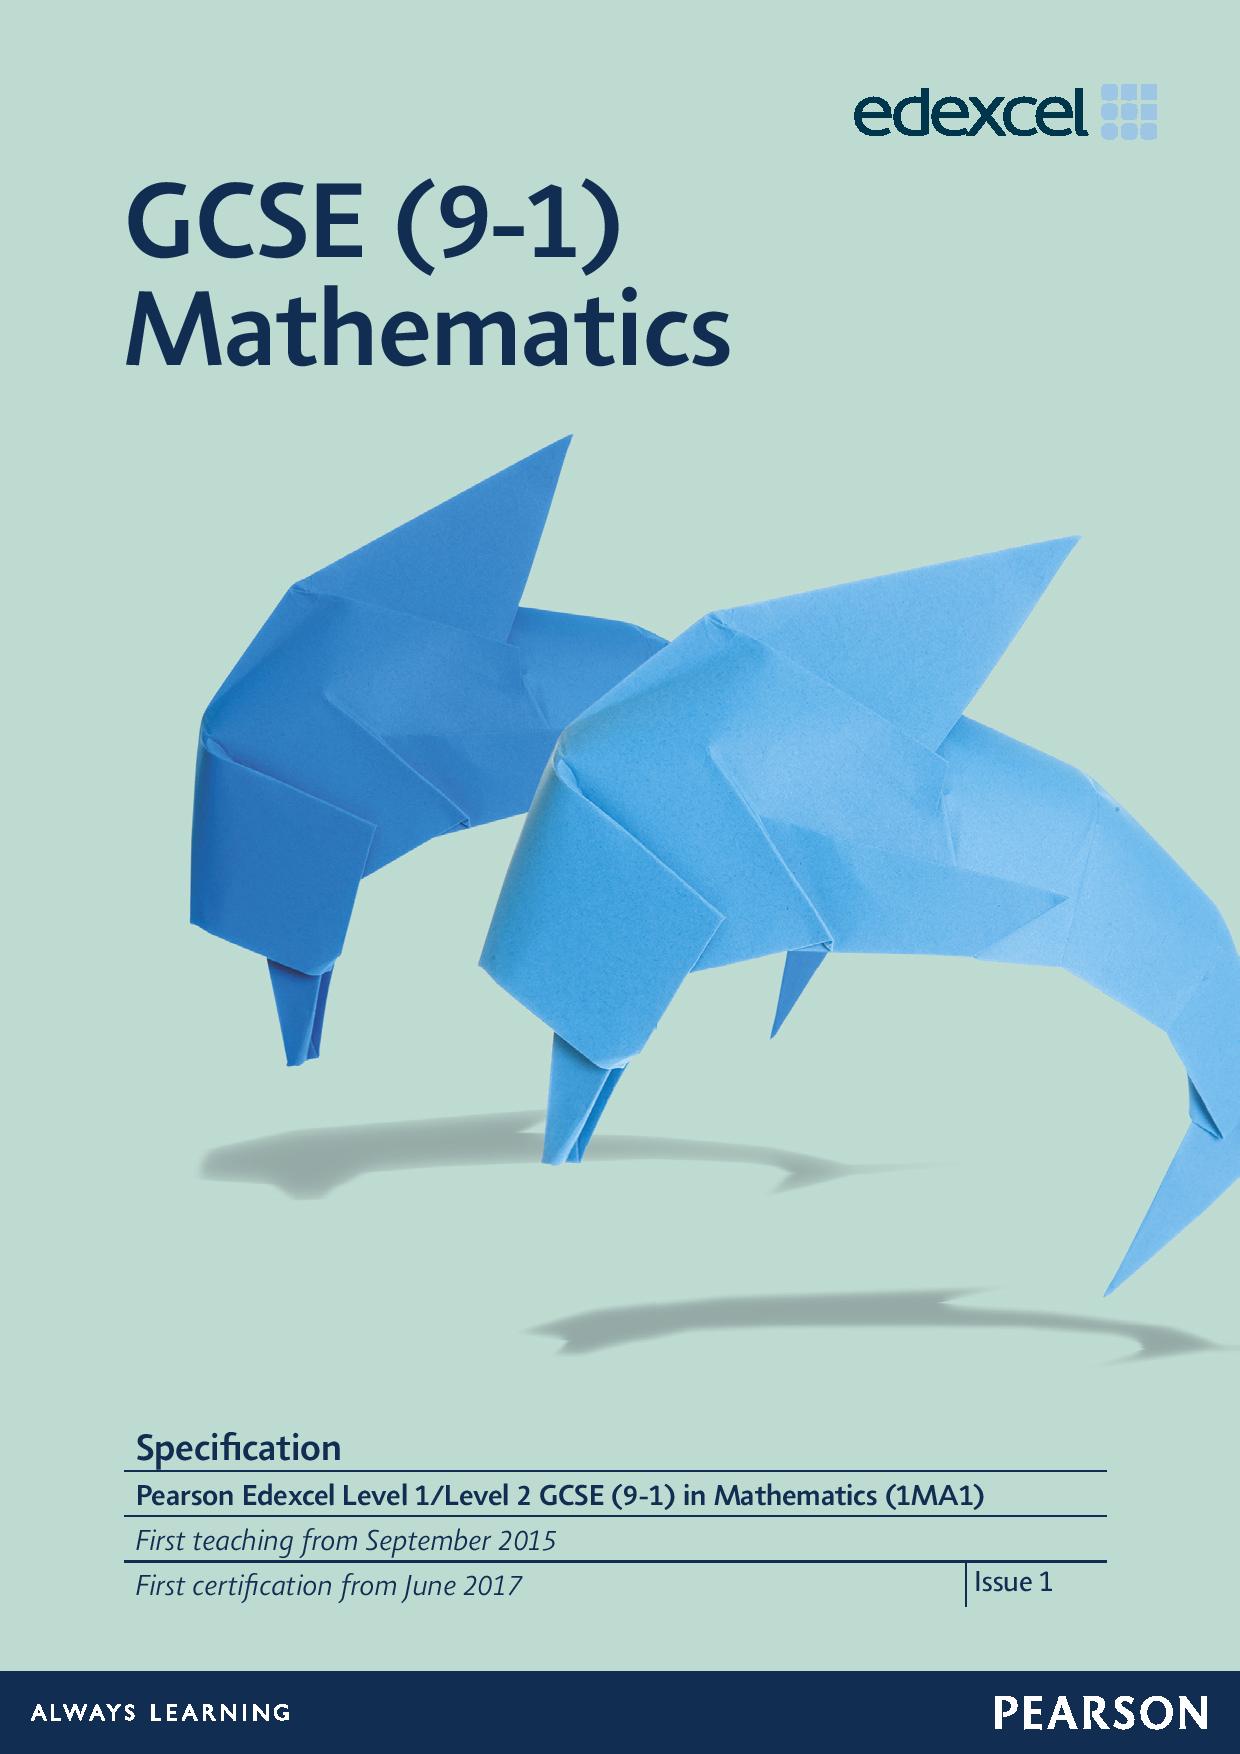 Link to GCSE (9-1) Mathematics specification page